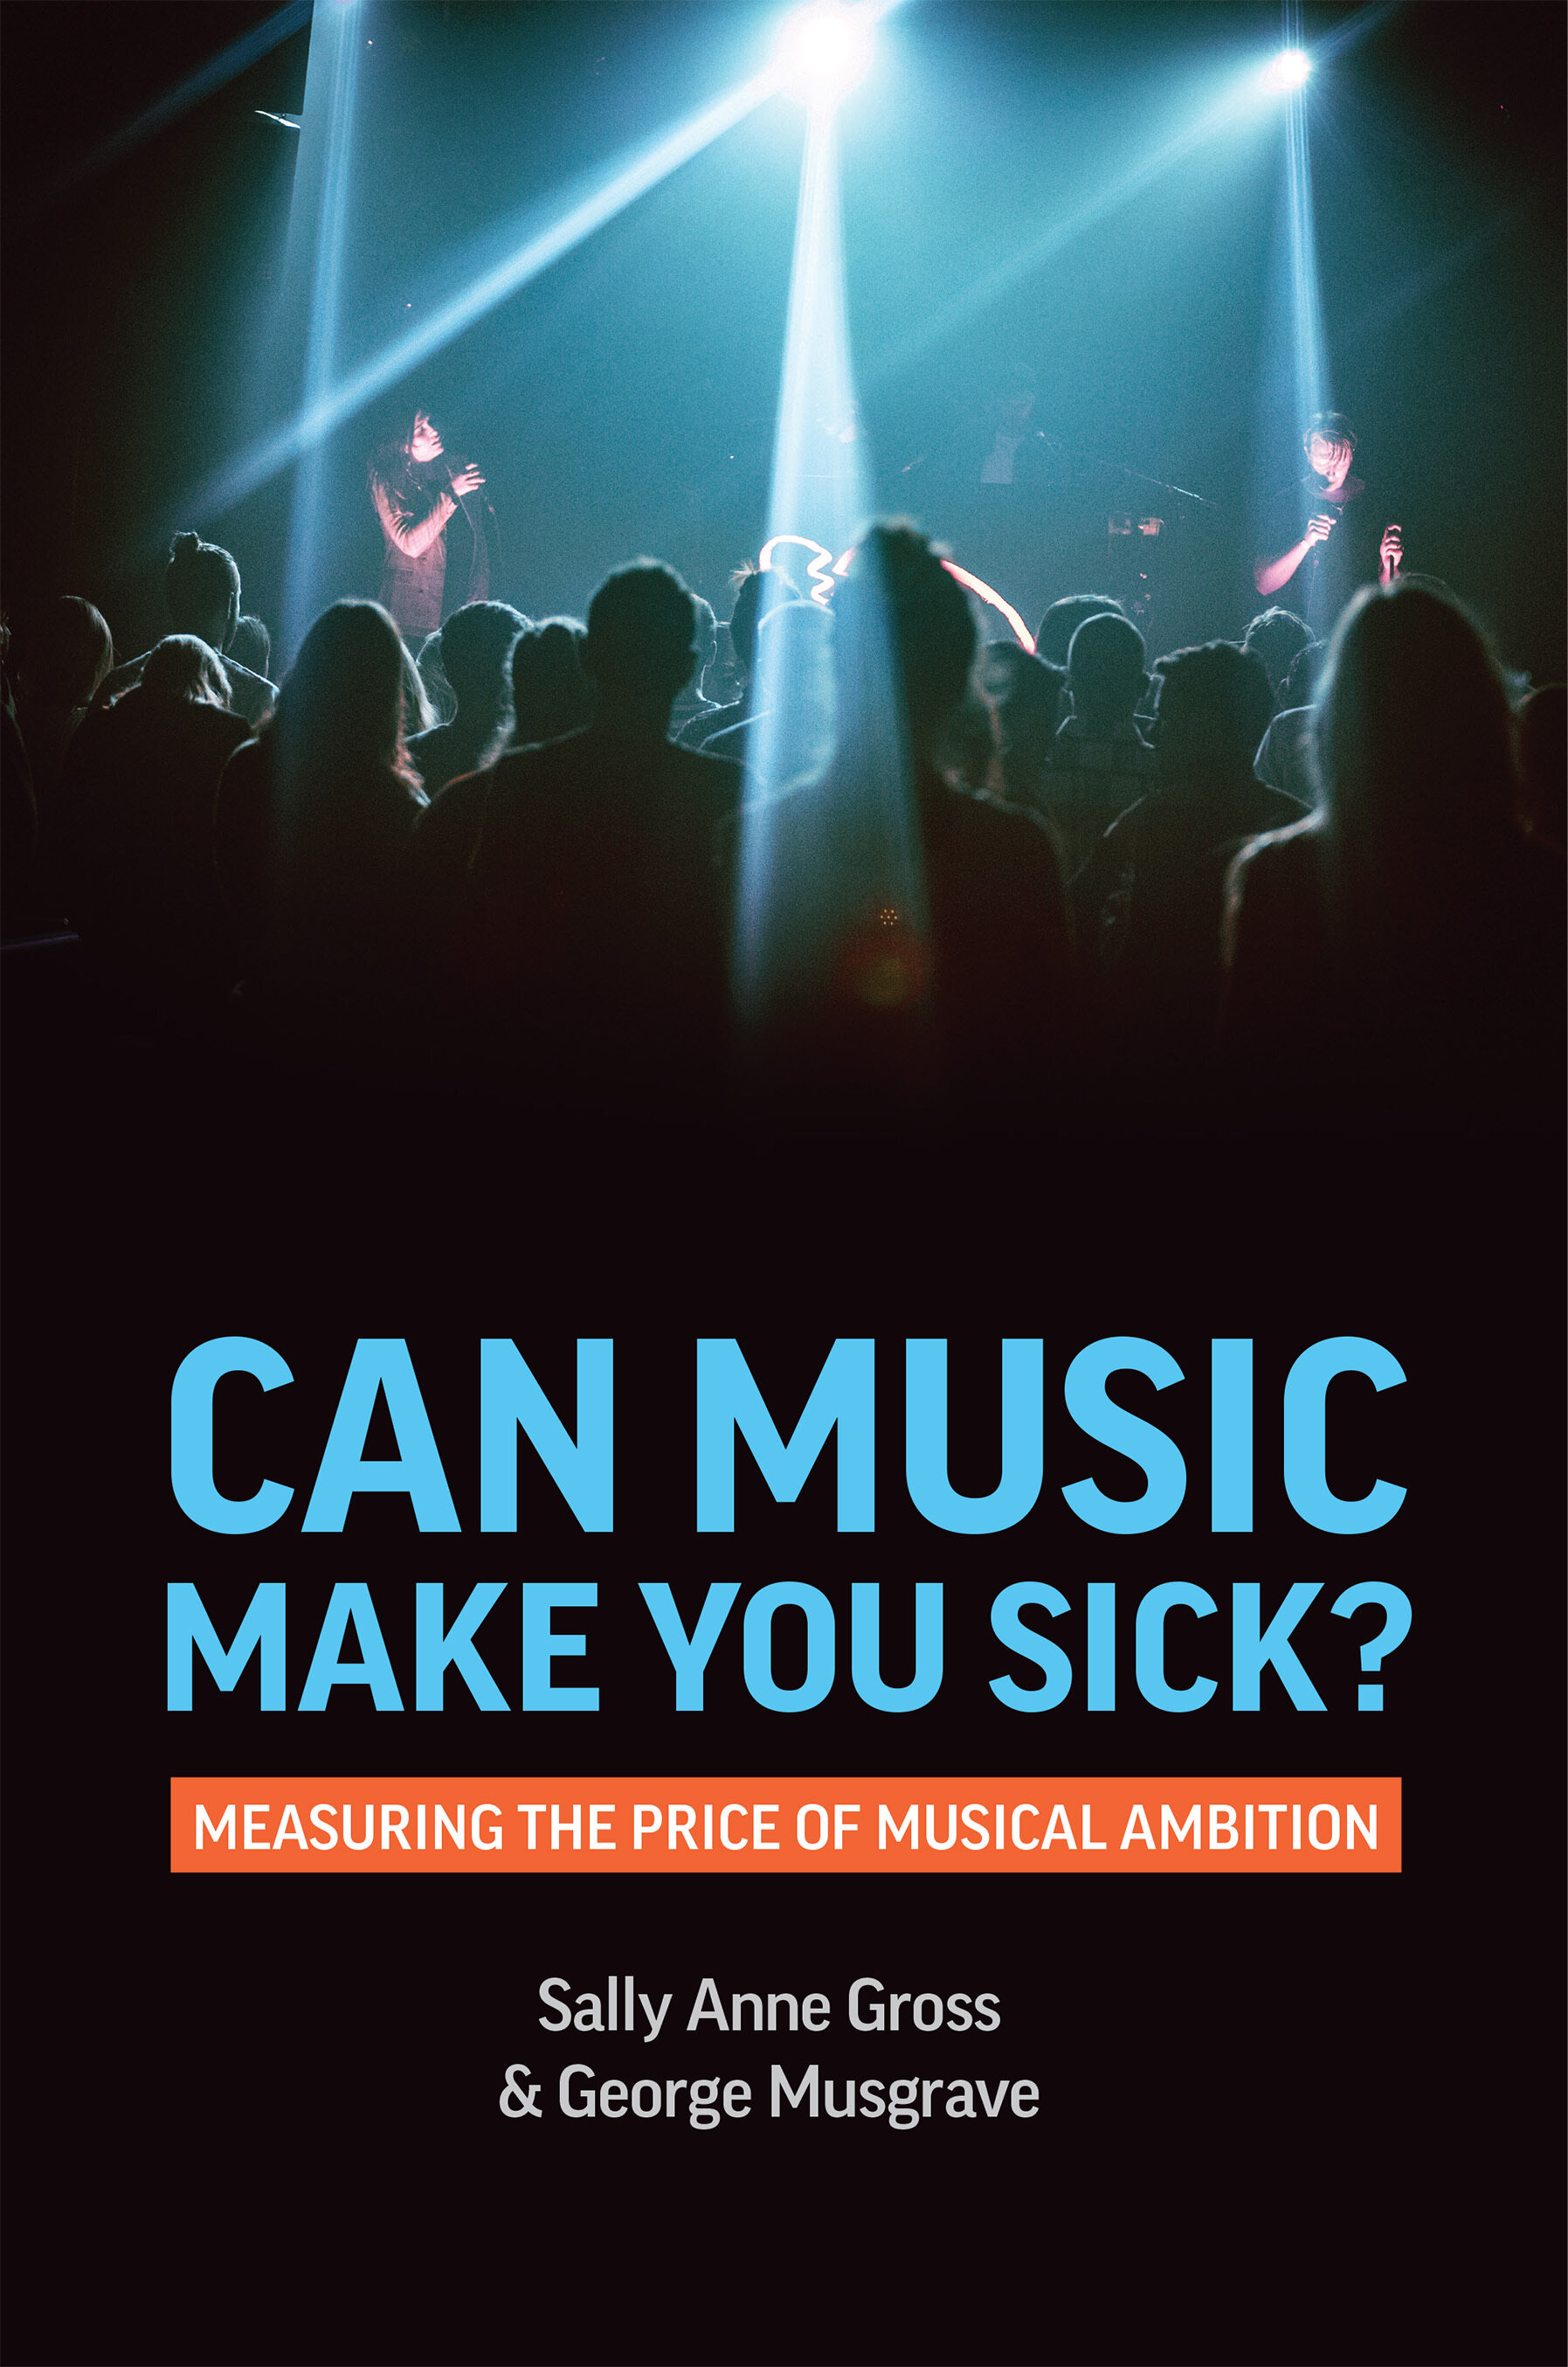 Cover of Can Music Make You Sick: Measuring the Price of Musical Ambition by Sally Anne Gross & George Musgraves. The title appears in pale blue over the subtitle in white on an orange bar with the author names appearin below. All title information is in the lower half of the cover. The top half shows people standing in a darkened concert room with bright spotlights illuminating the musicians; the audience is shown from behind in sillhouette.